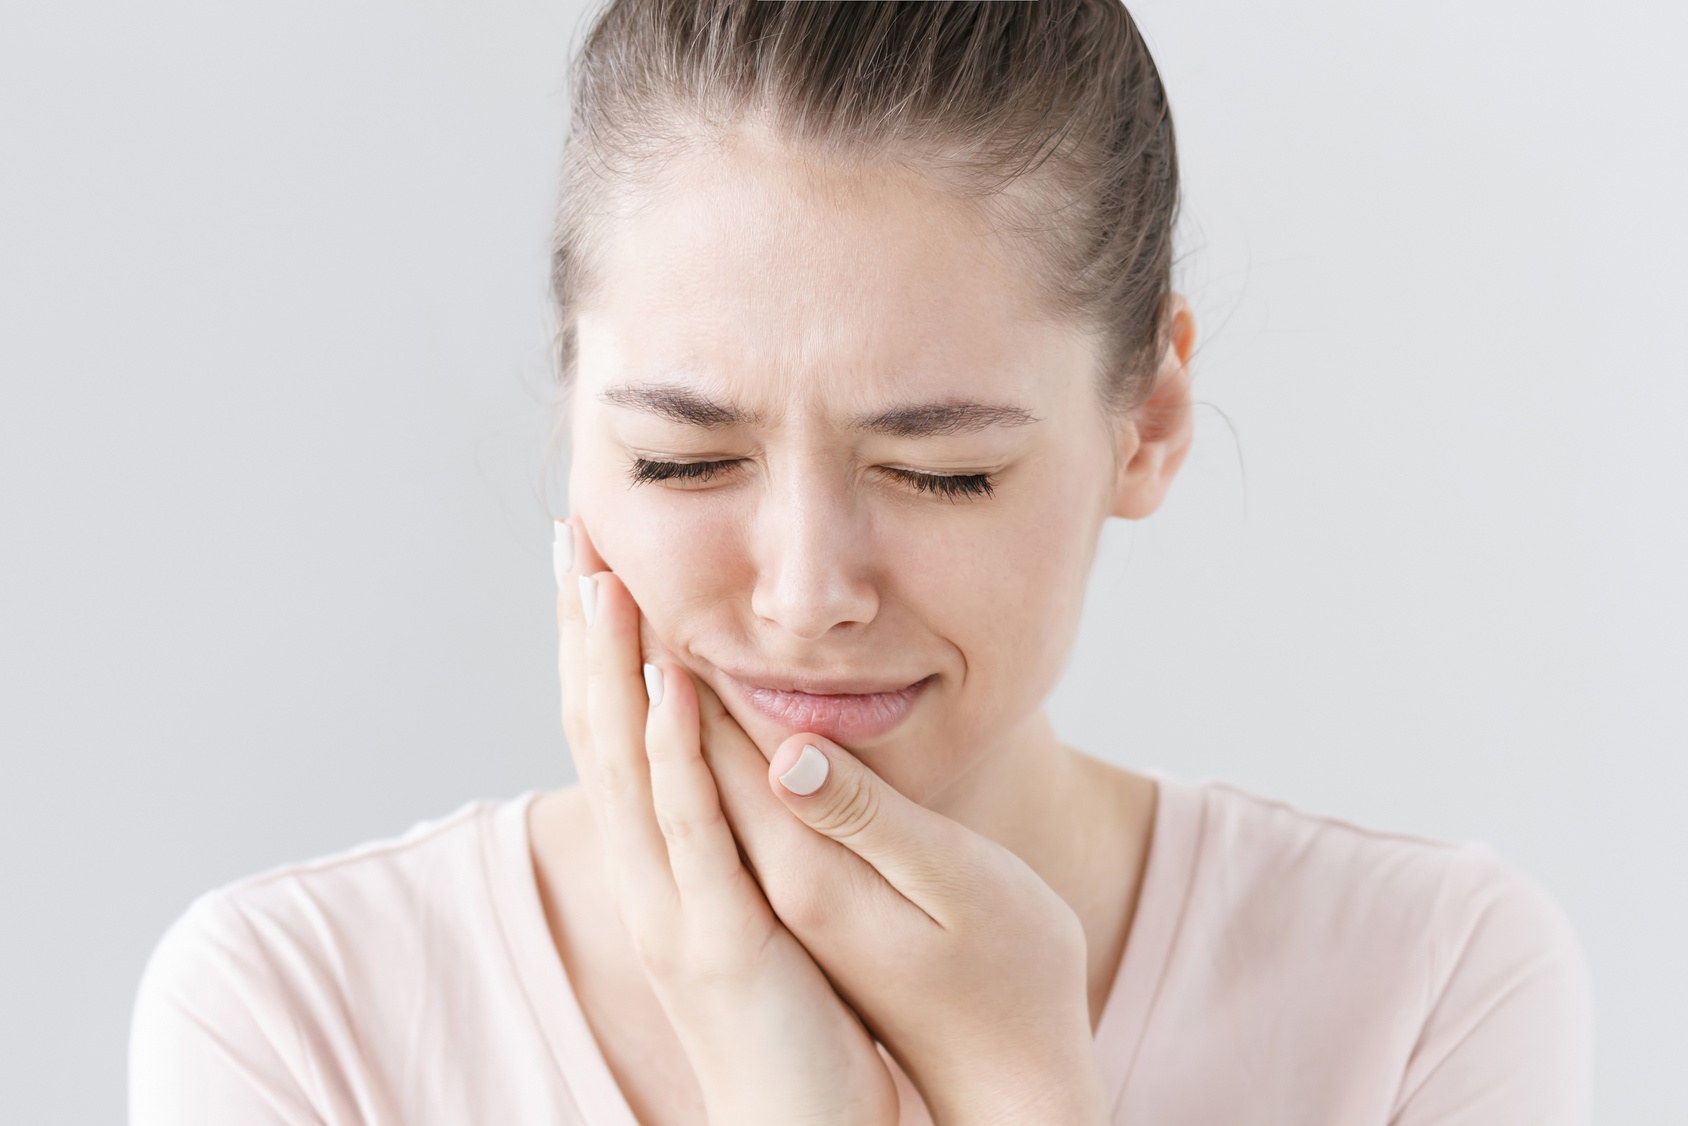 Does Vinegar Help Tooth Pain?